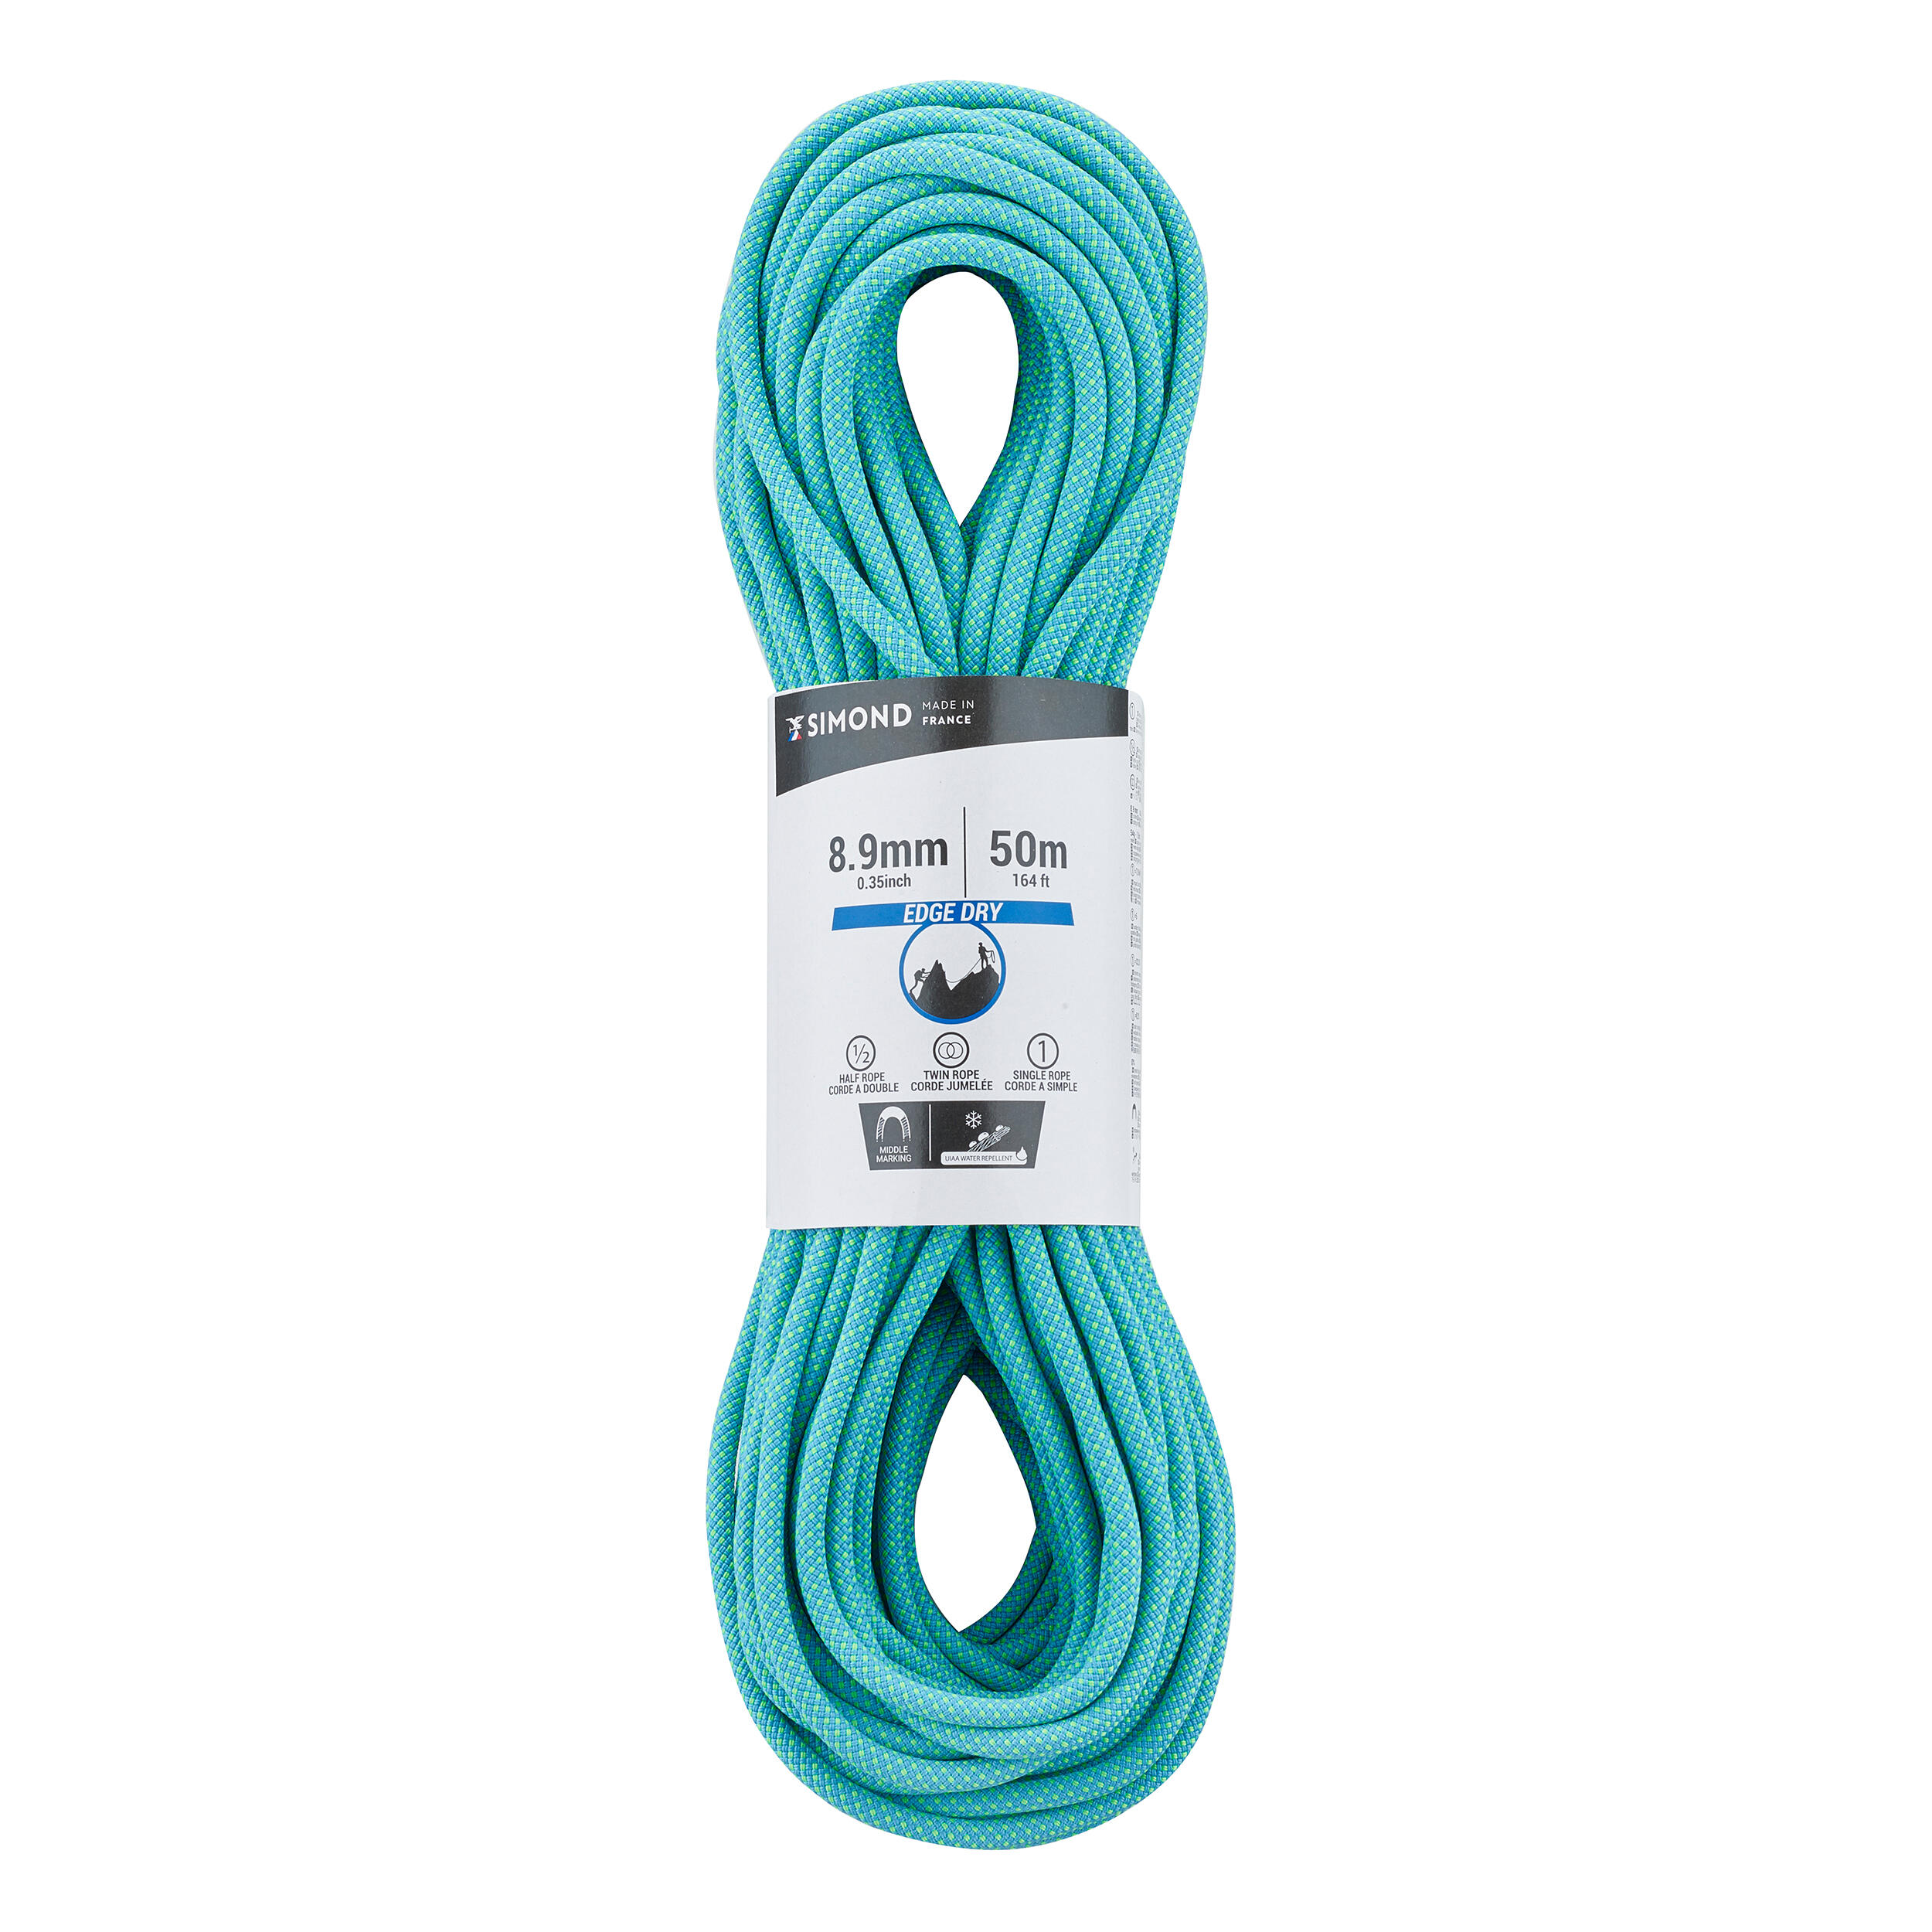 CLIMBING AND MOUNTAINEERING TRIPLE ROPE STANDARD 8.9 mm x 50 m - EDGE DRY TURQUOISE 1/3